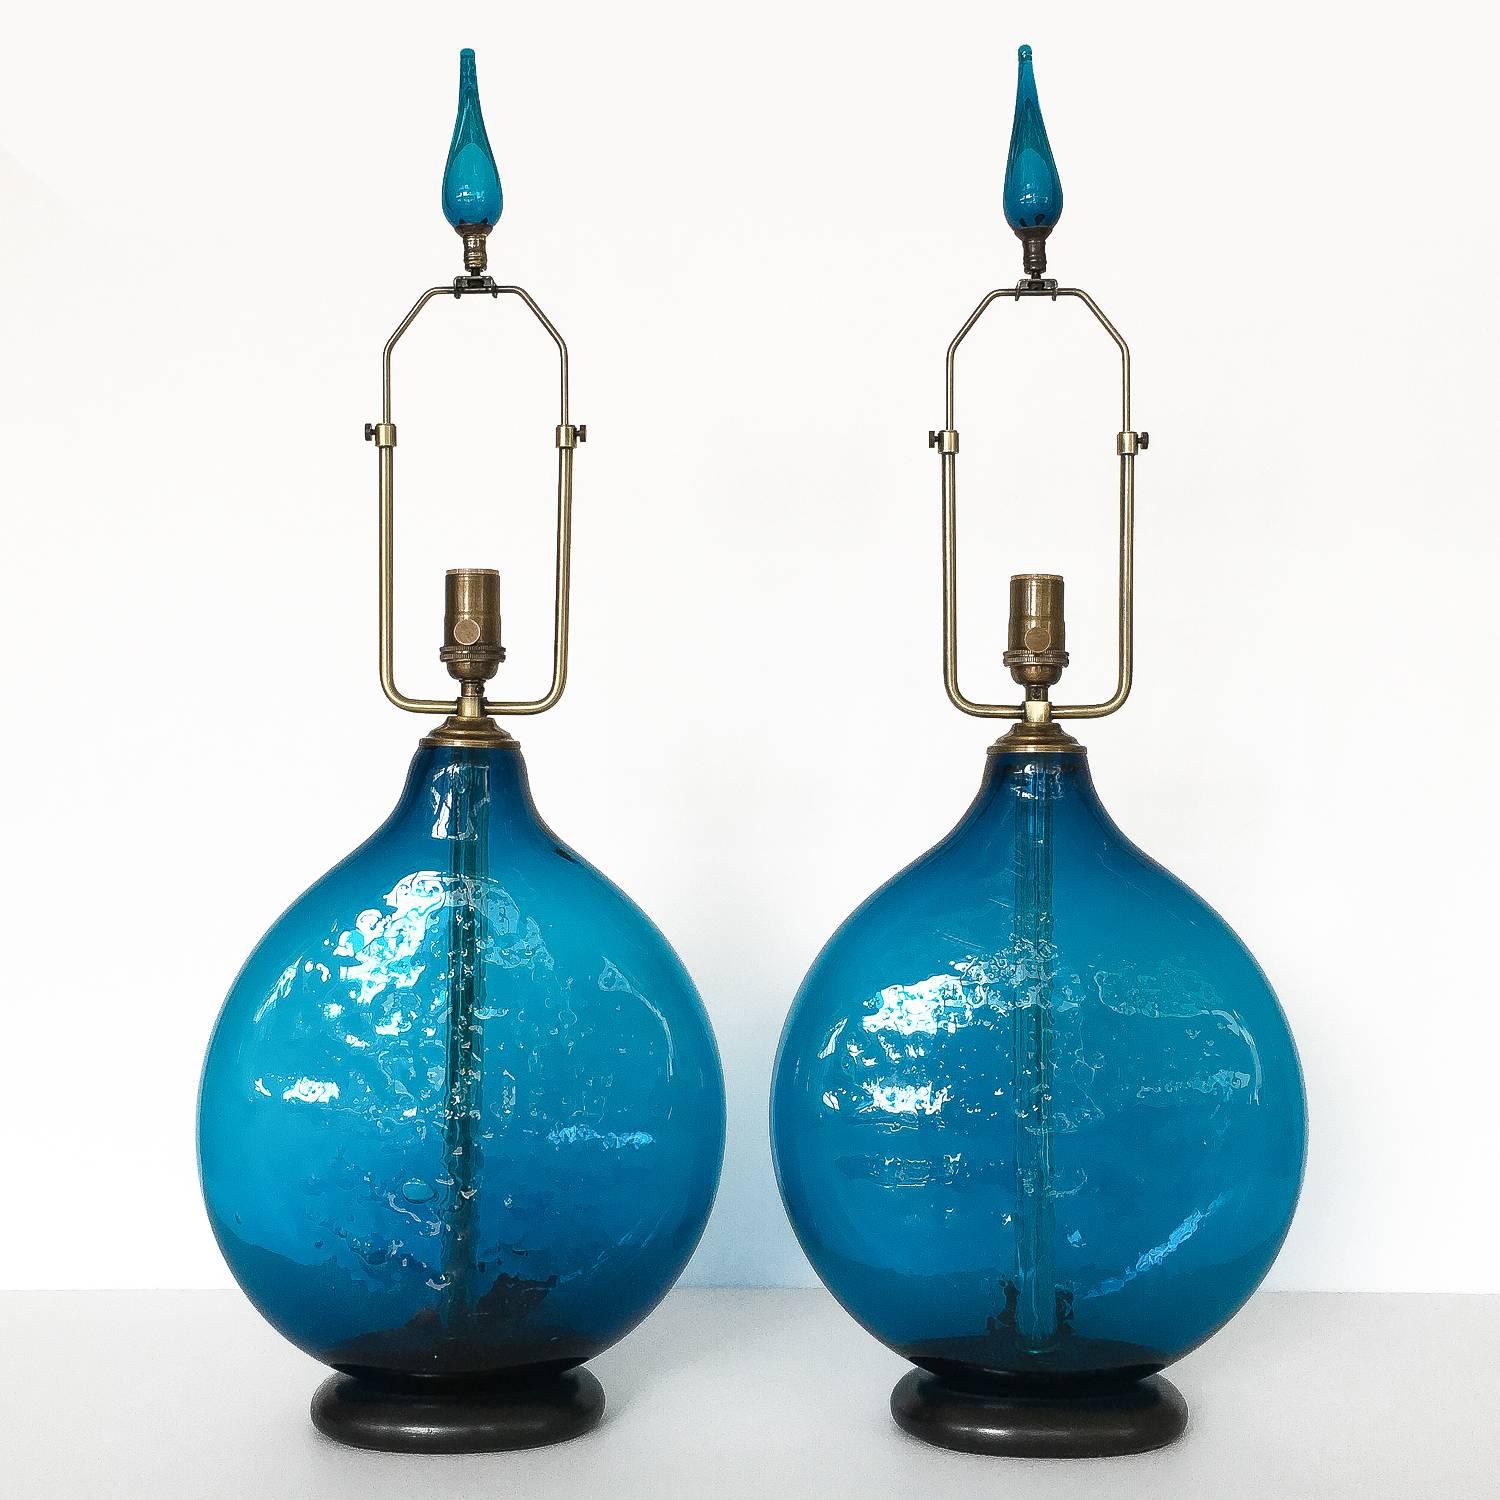 Pair of beautiful and vibrant dark cerulean blue blown glass table lamps by Wayne Husted for Blenko, circa 1960s. Textured or bubbled flask shaped glass bodies with matching original glass finials. Ebonized solid wood bases. Newly wired with antique